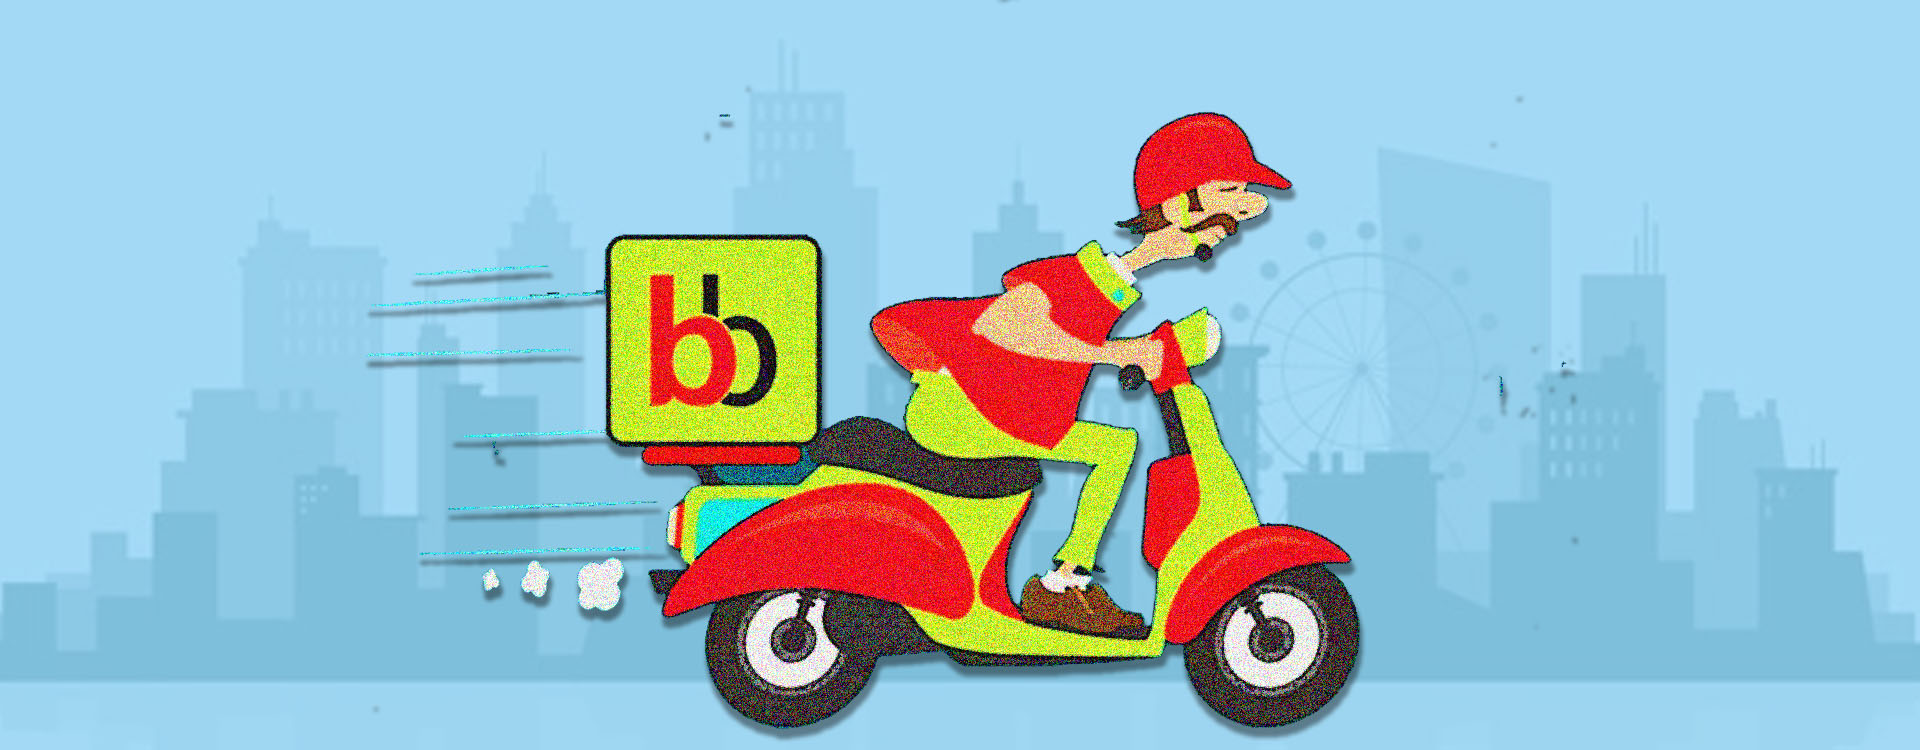 BigBasket: An Online Grocery Revolution, One Basket at a Time